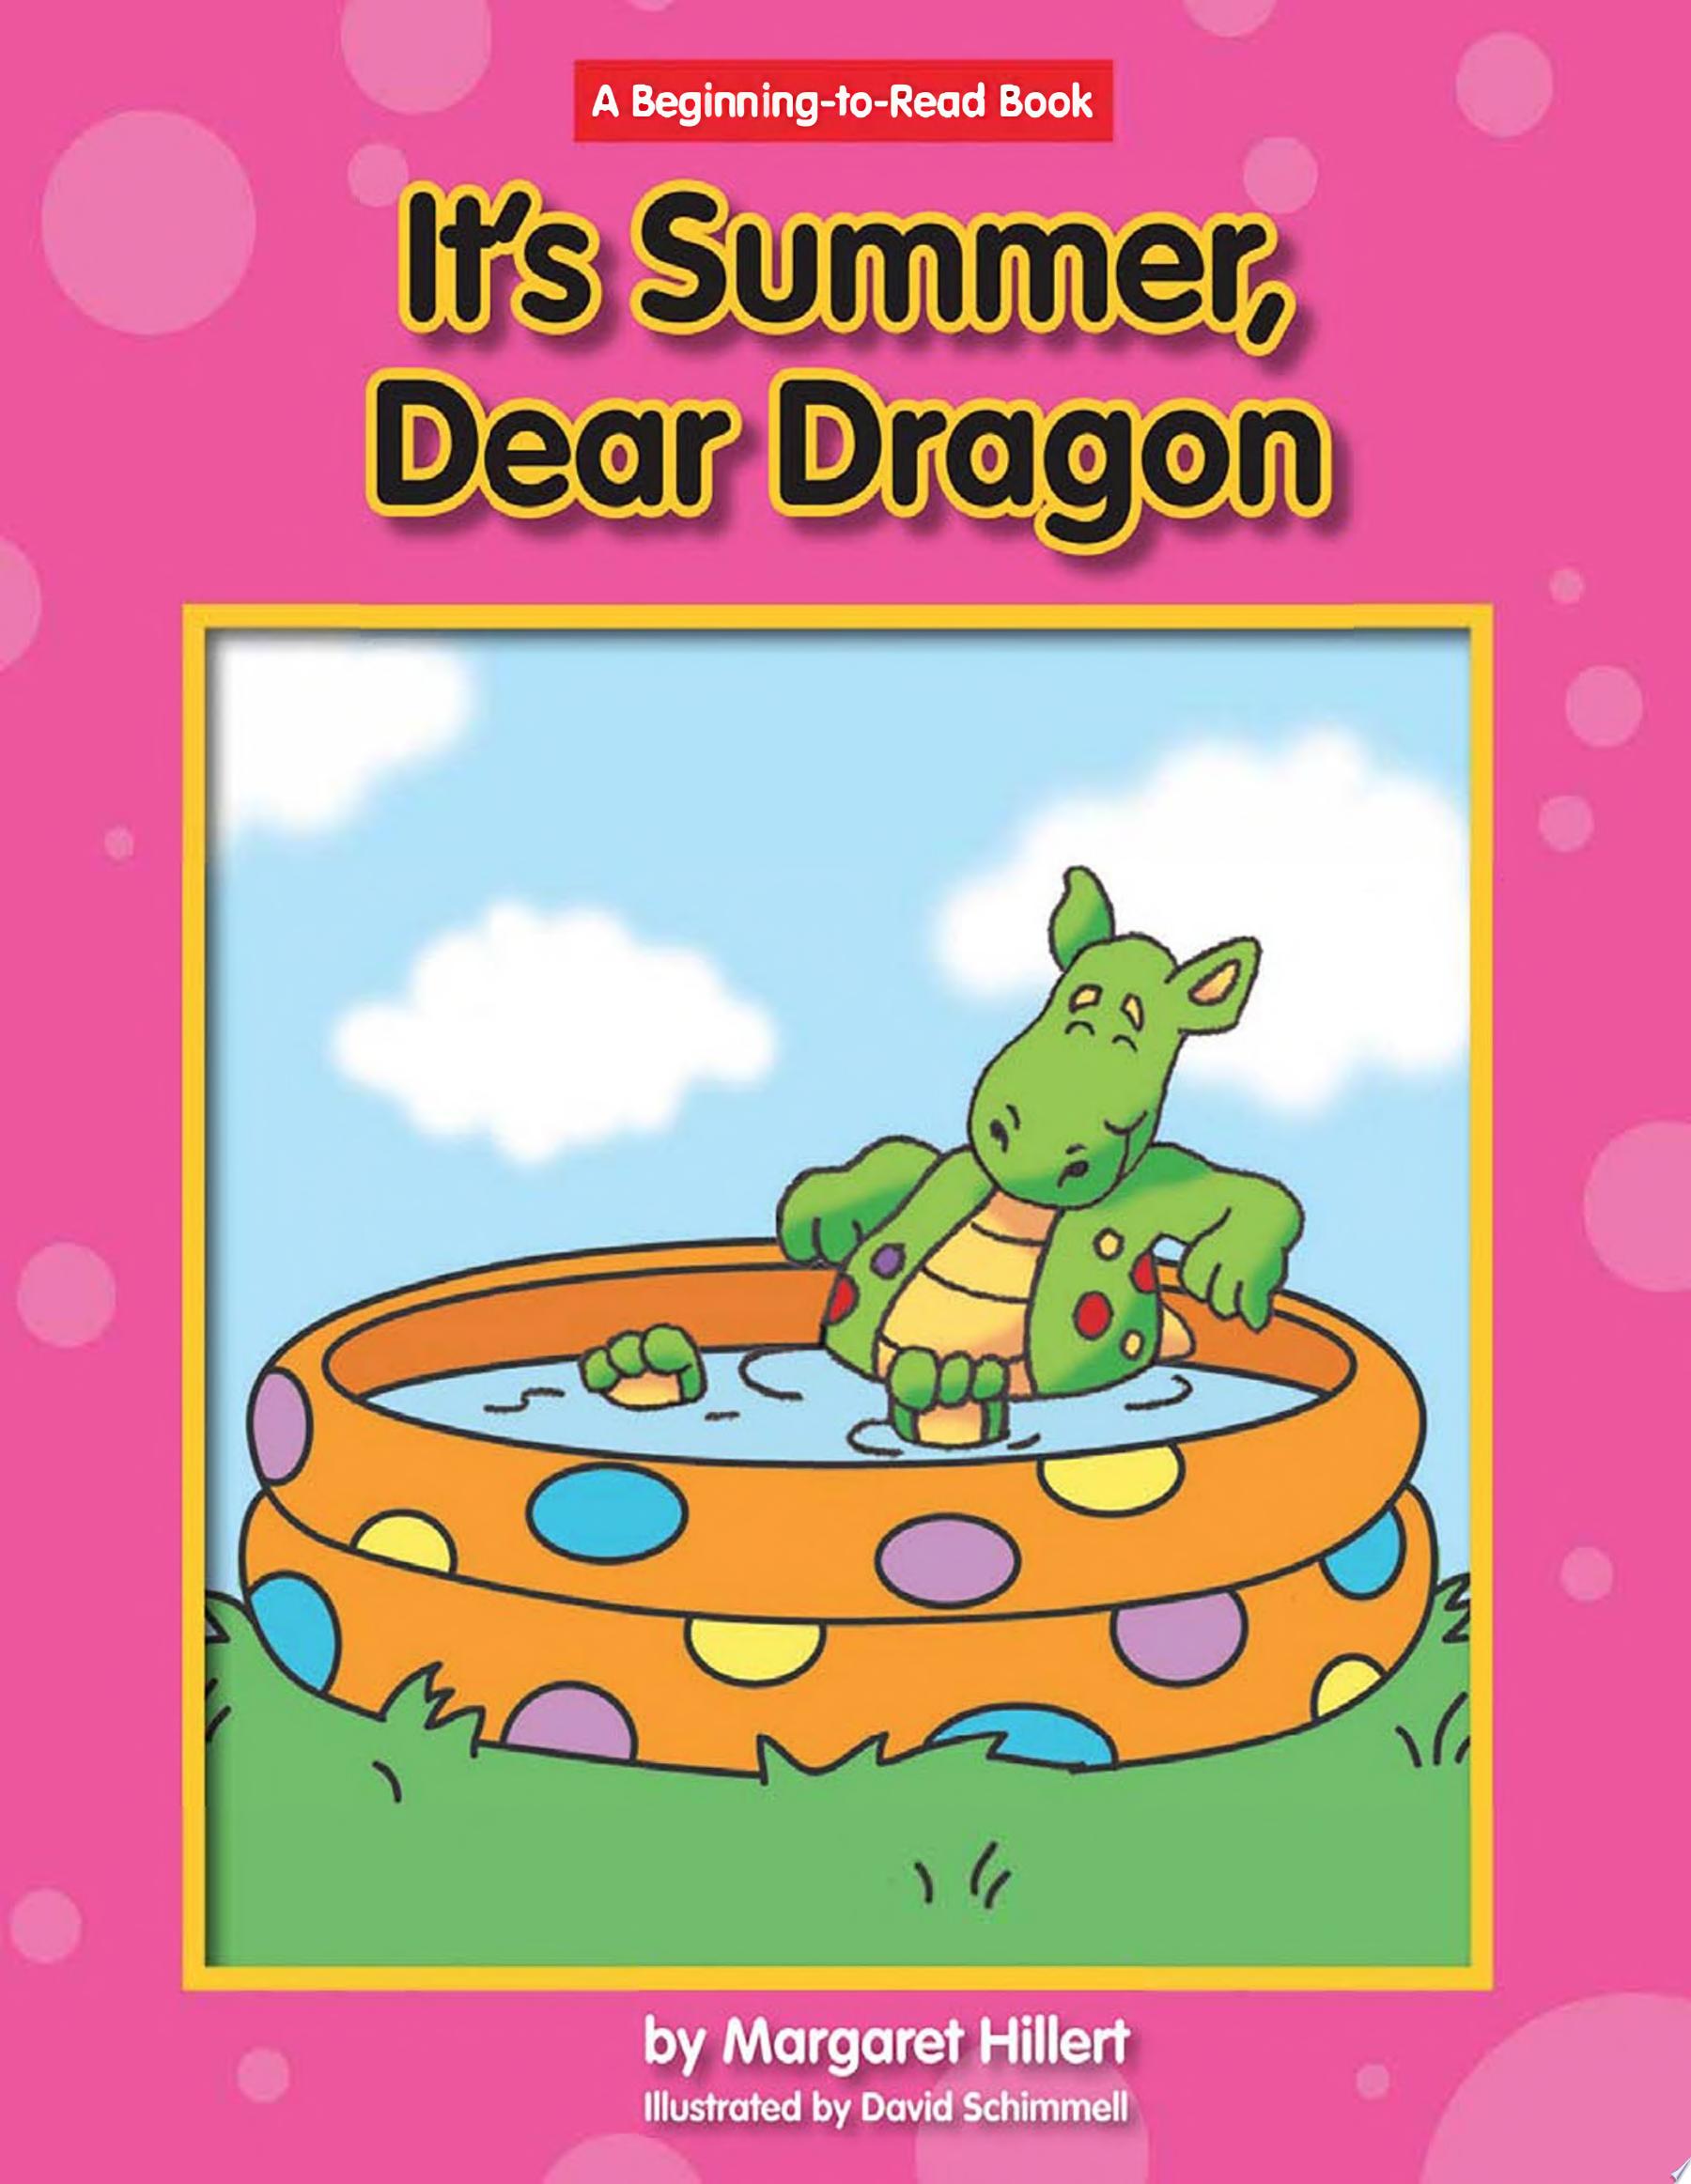 Image for "It's Summer, Dear Dragon"